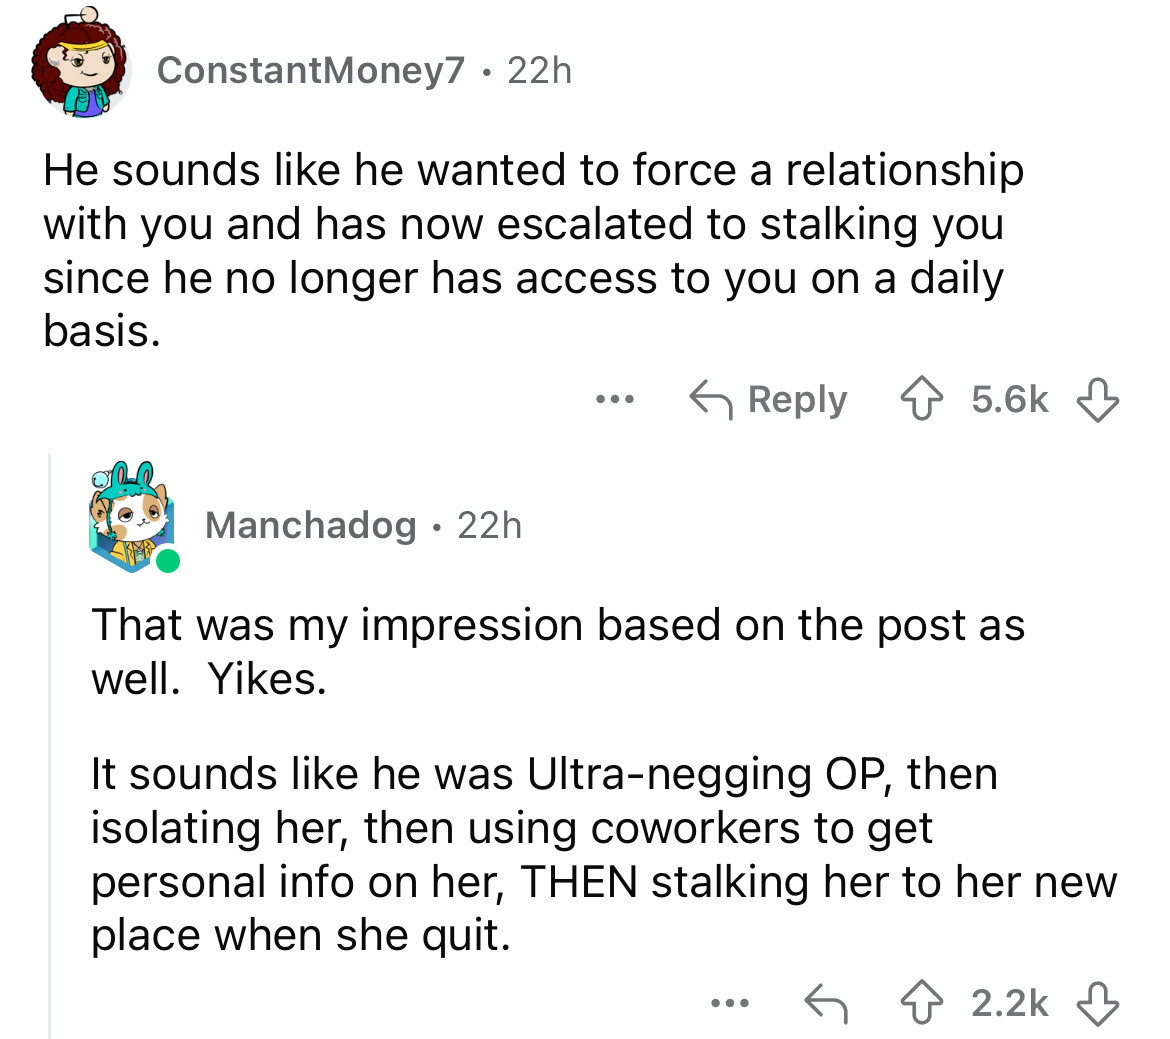 screenshot - ConstantMoney7 22h. He sounds he wanted to force a relationship with you and has now escalated to stalking you since he no longer has access to you on a daily basis. ... Manchadog. 22h That was my impression based on the post as well. Yikes. 